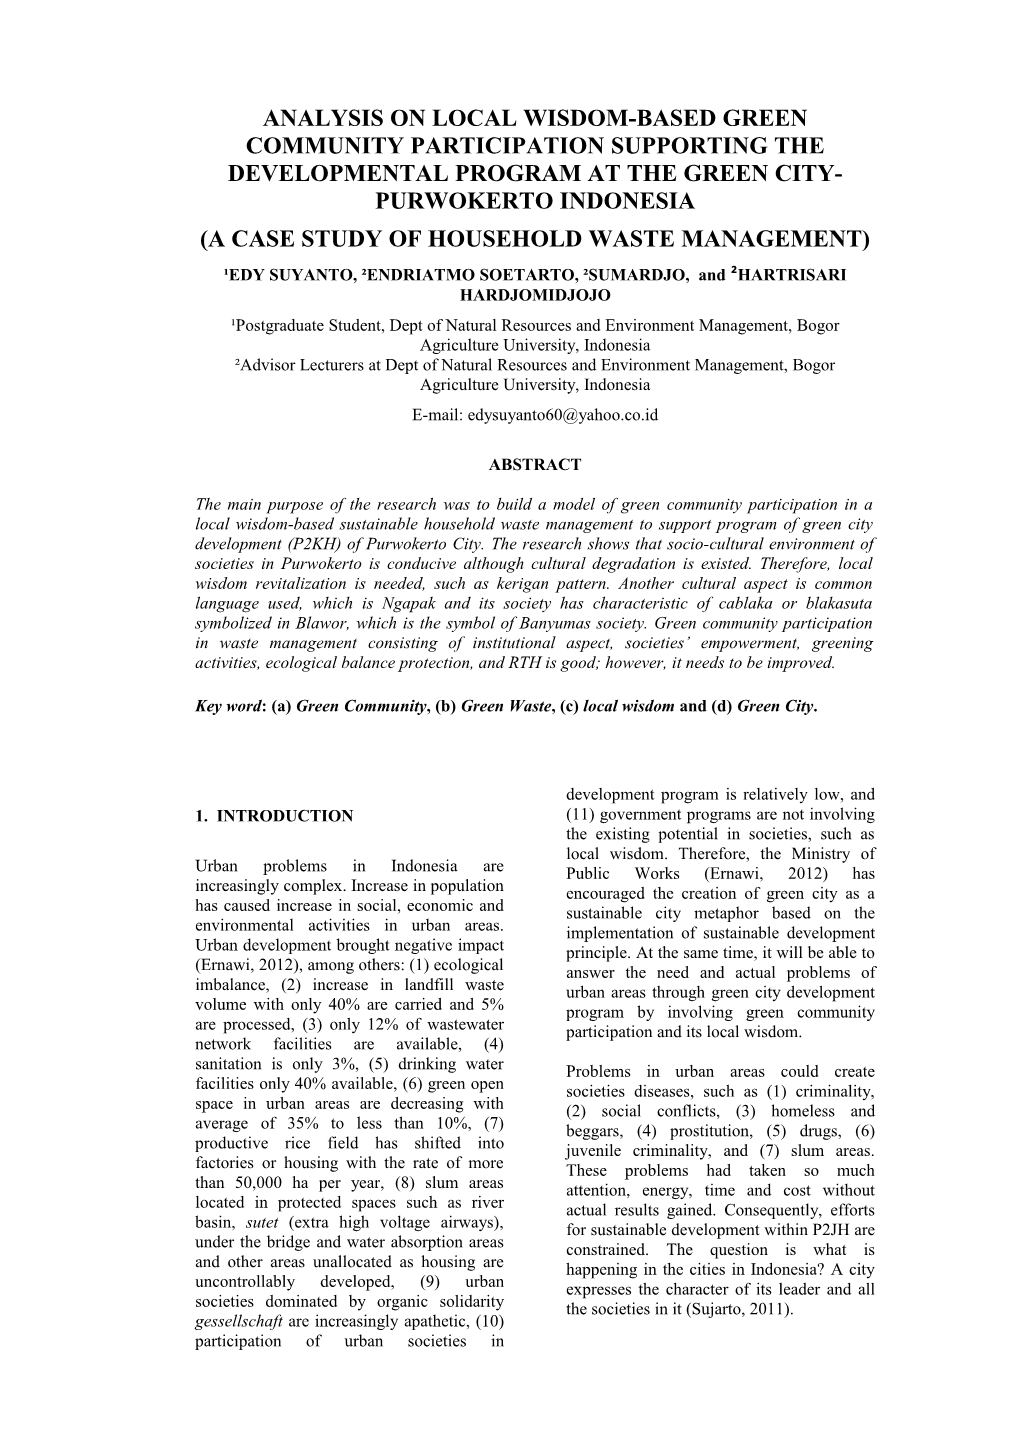 A Case Study of Household Waste Management